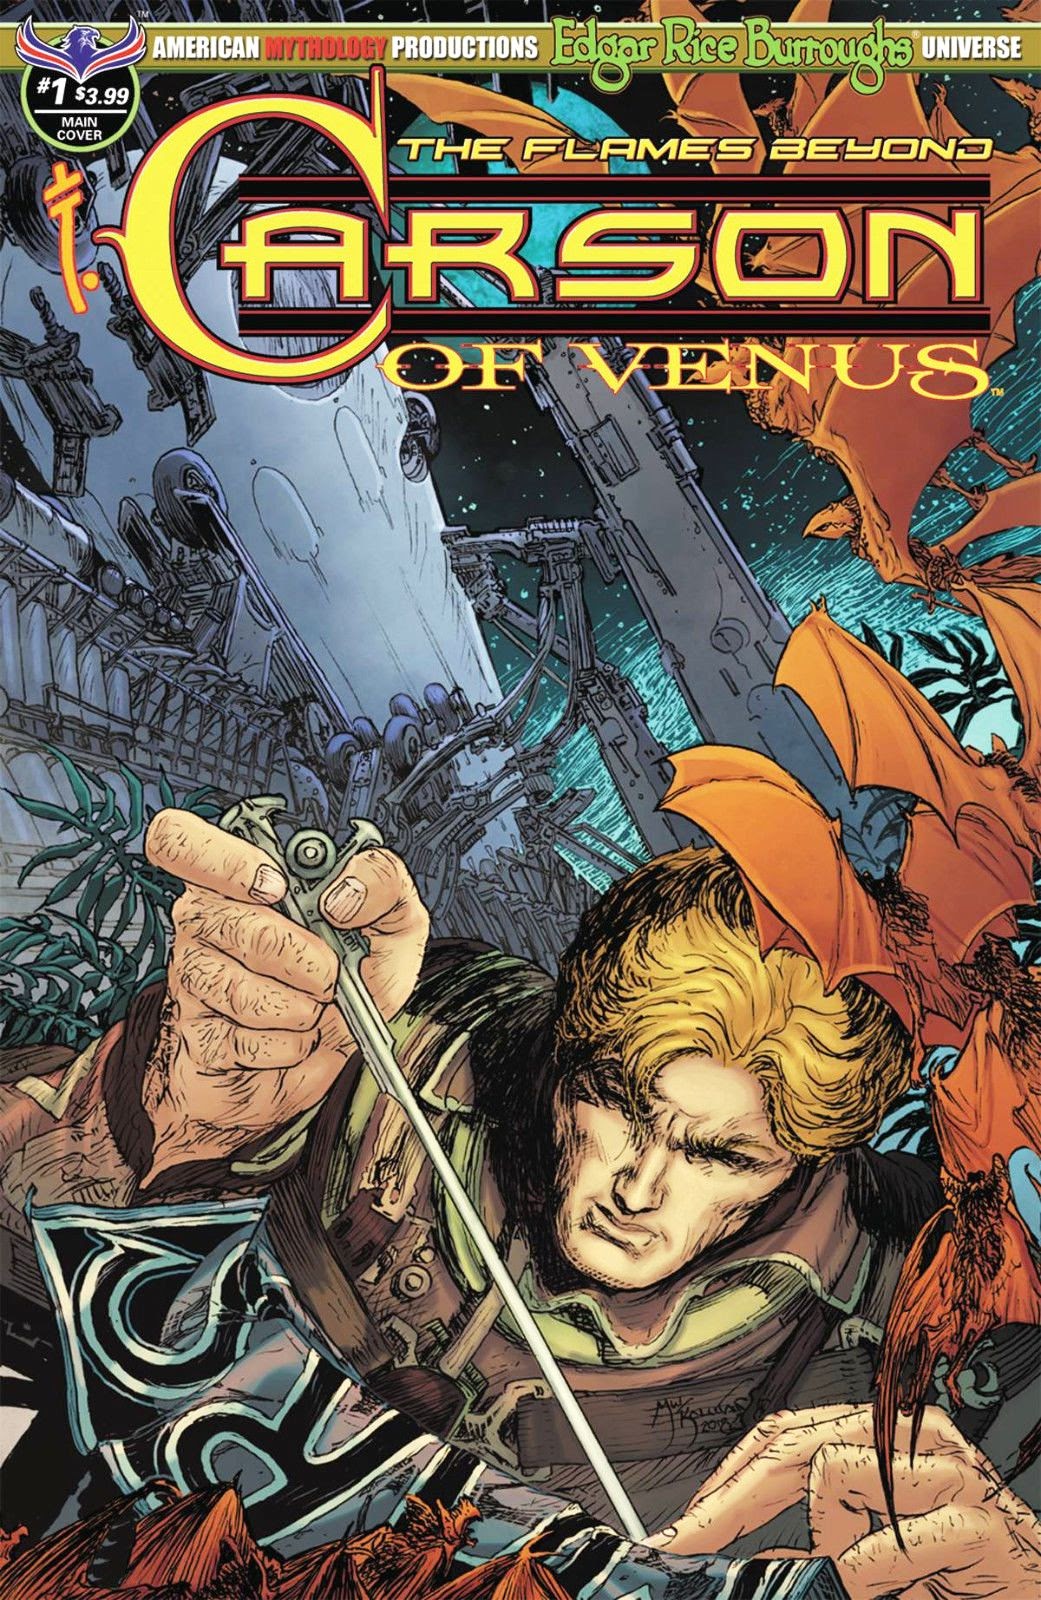 Read online Carson of Venus: The Flames Beyond comic -  Issue #1 - 1